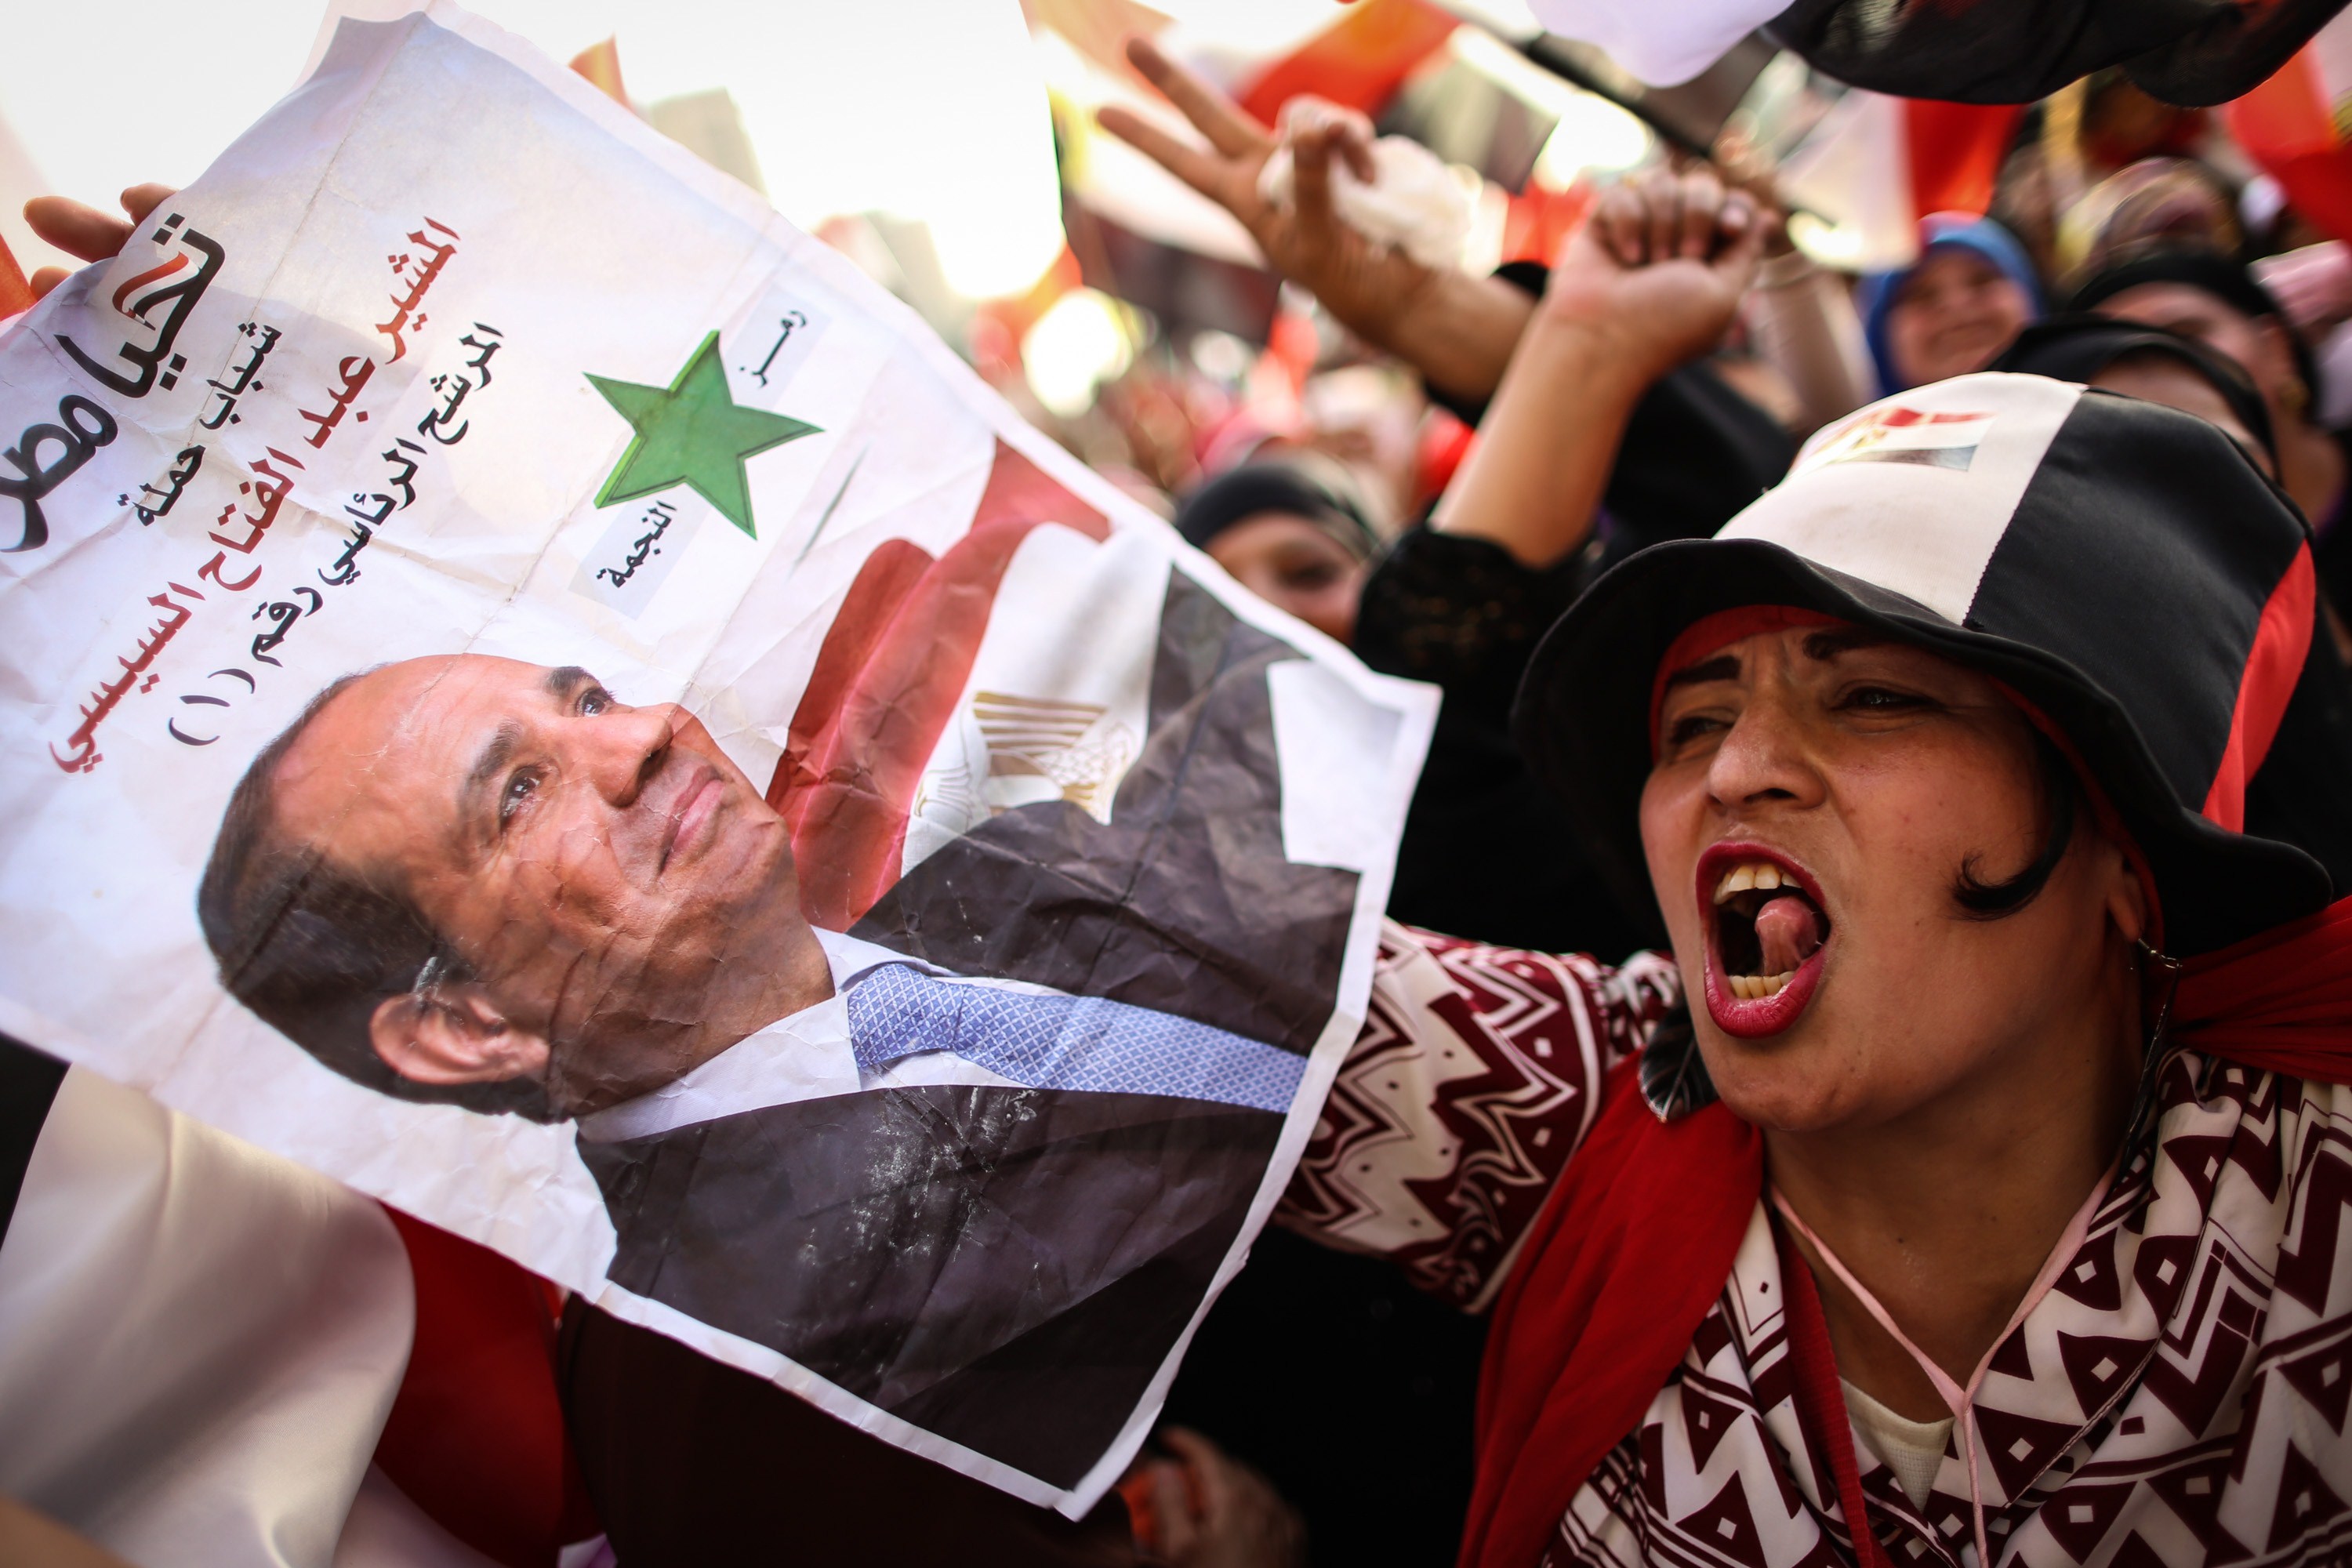 Al-Sisi is pushing Egypt away from democracy: US report